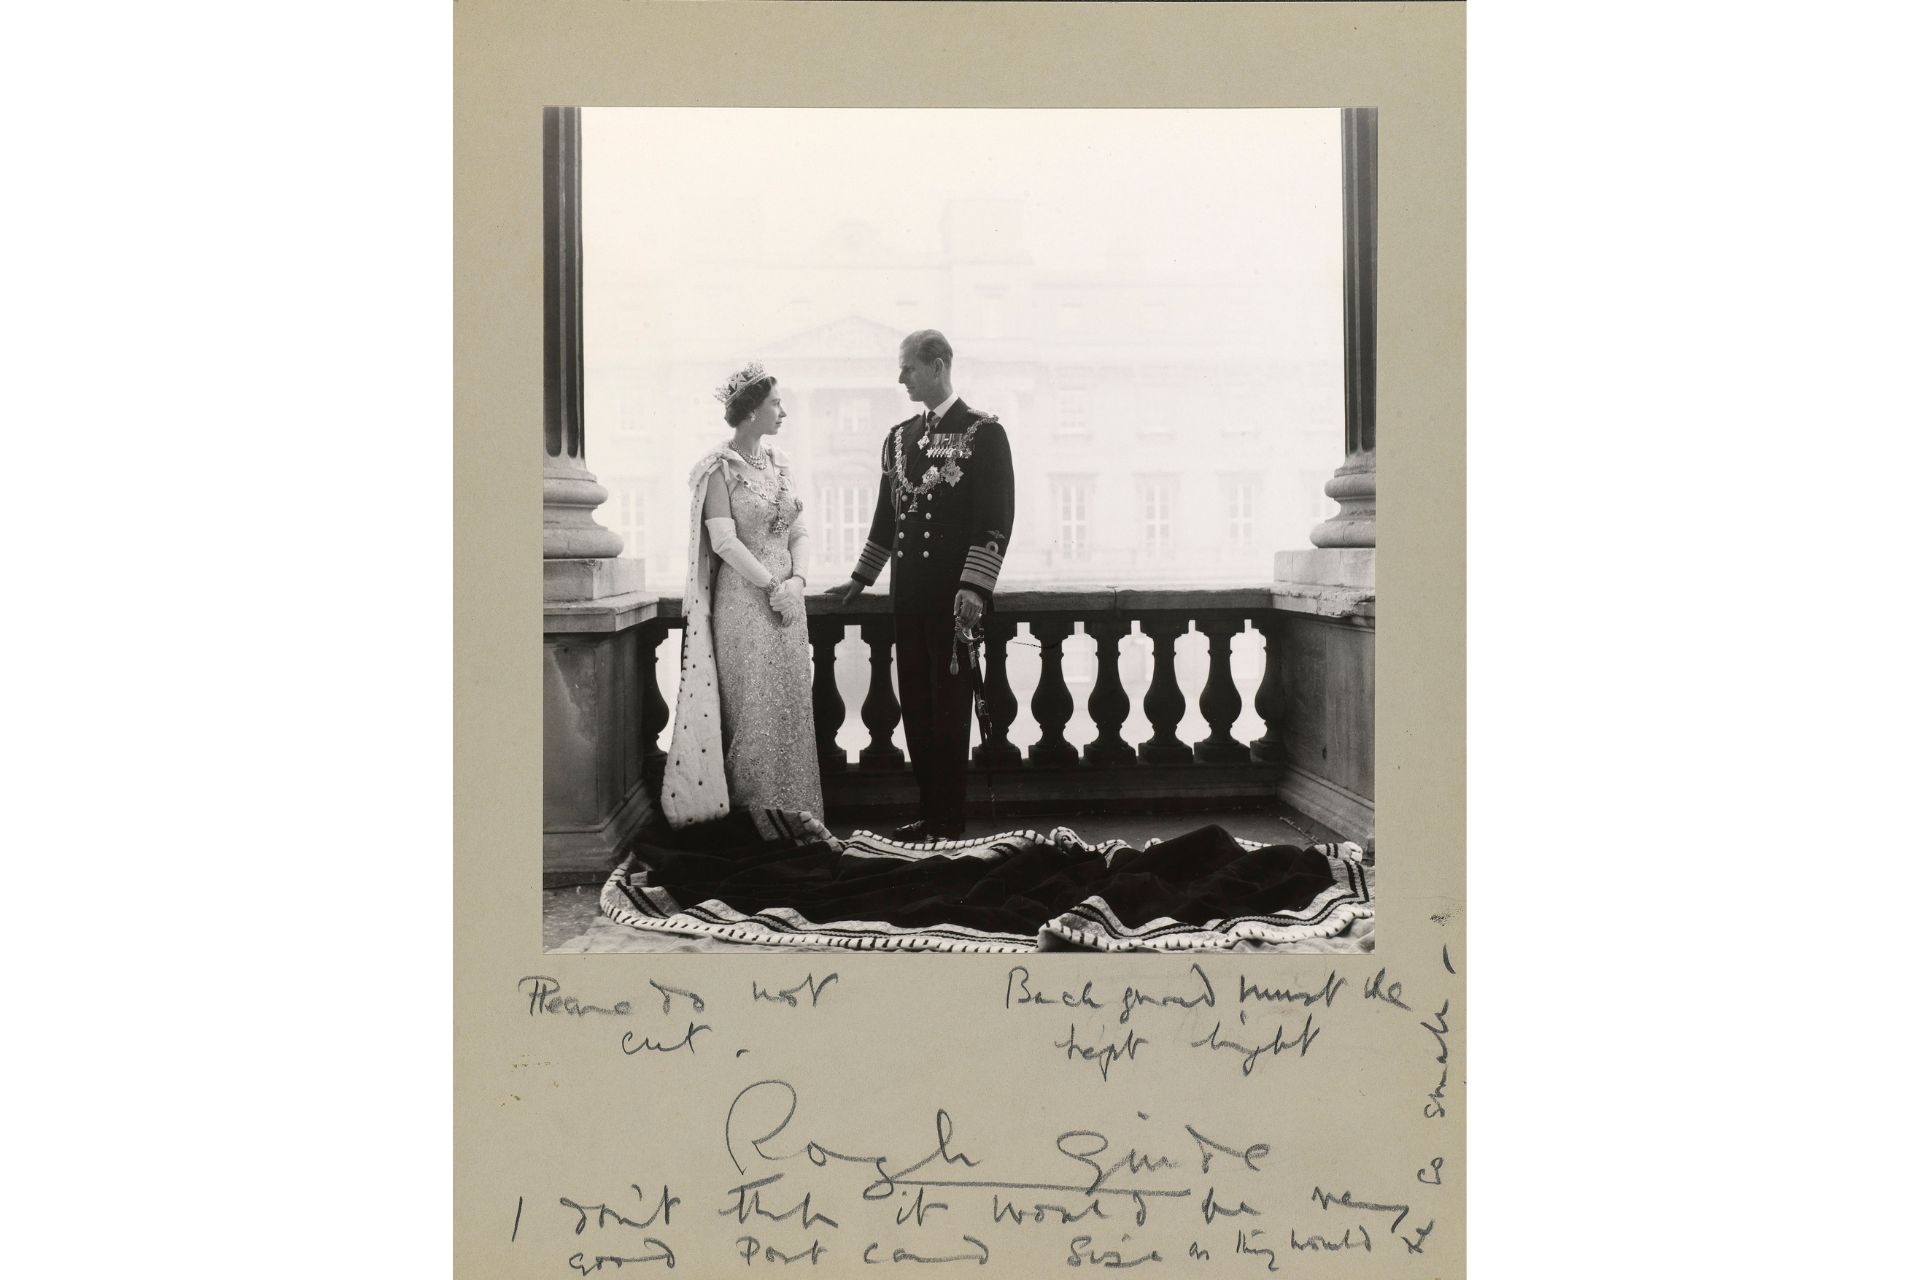 An annotated photograph of the late Queen Elizabeth II and Prince Philip